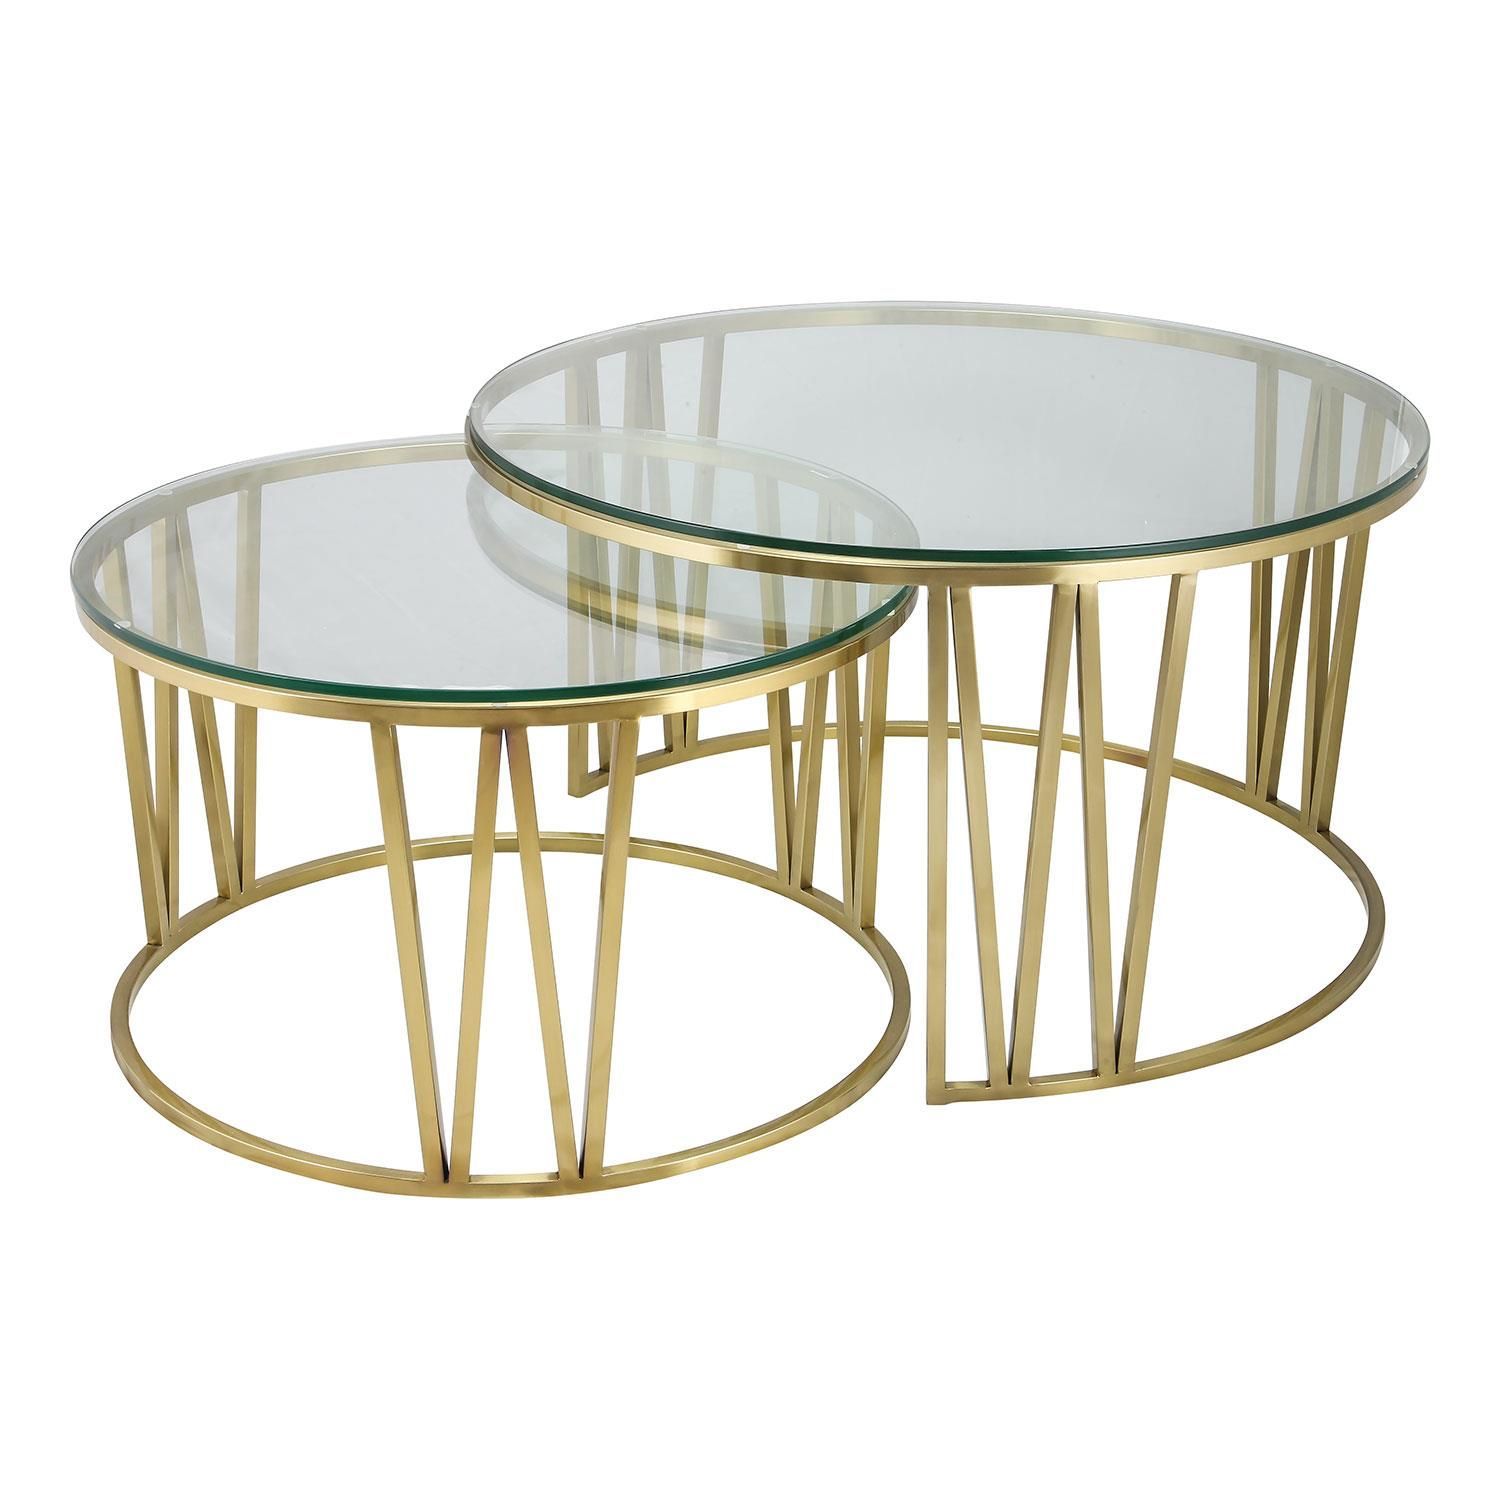 Mila Gold Coffee Table Glass Top | Coffee Tables | My Home Rocks With Regard To Smooth Top Coffee Tables (View 14 of 20)